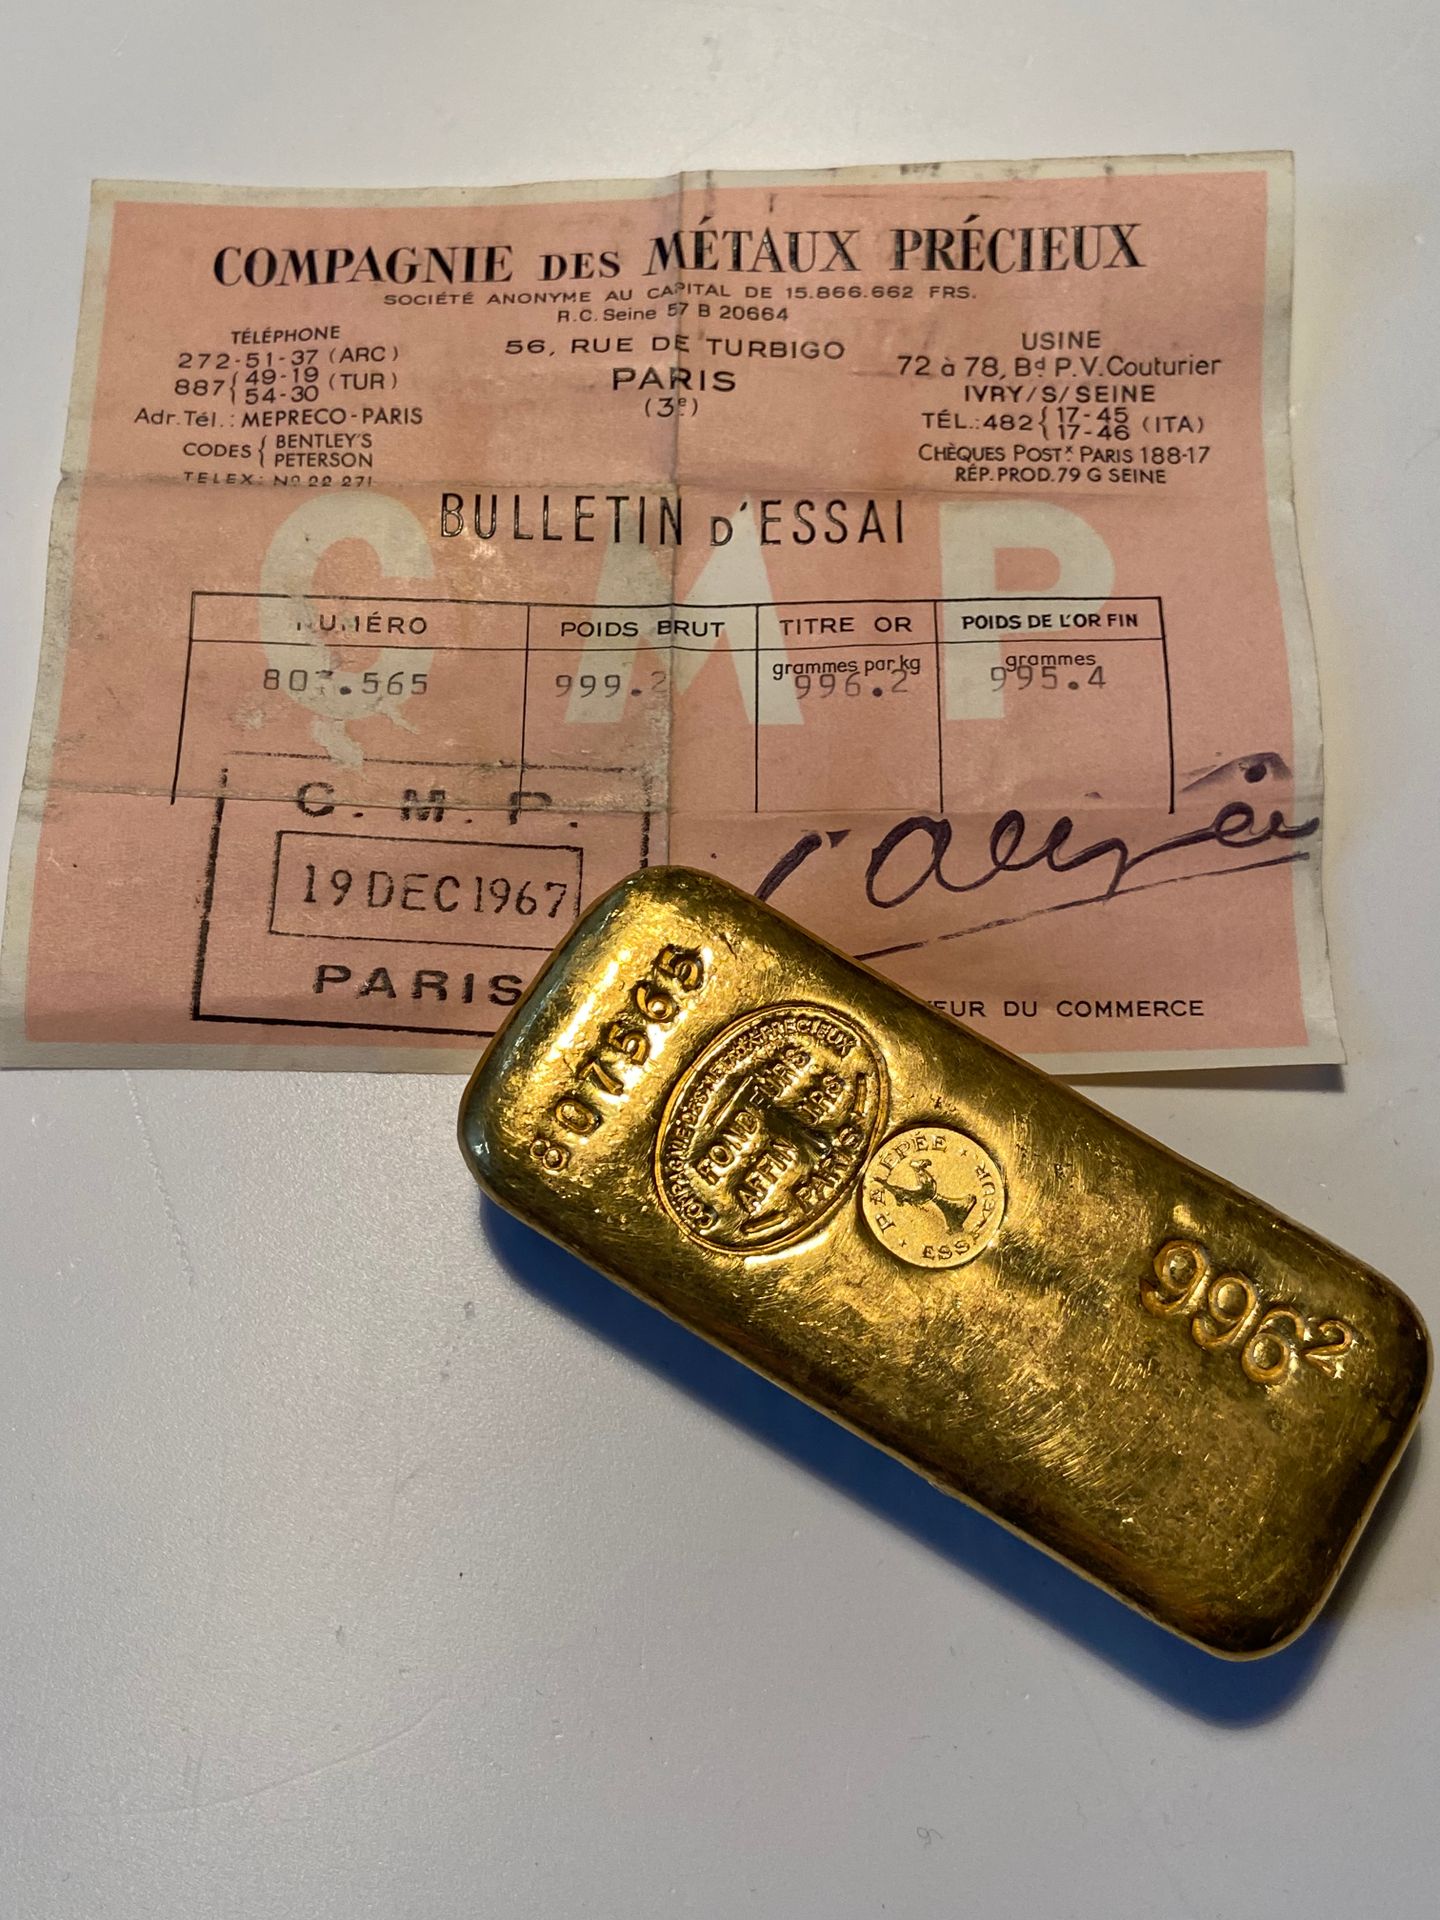 Null 
A gold bar bearing the number 807565, gross weight 999.2 gr.
Certificate o&hellip;